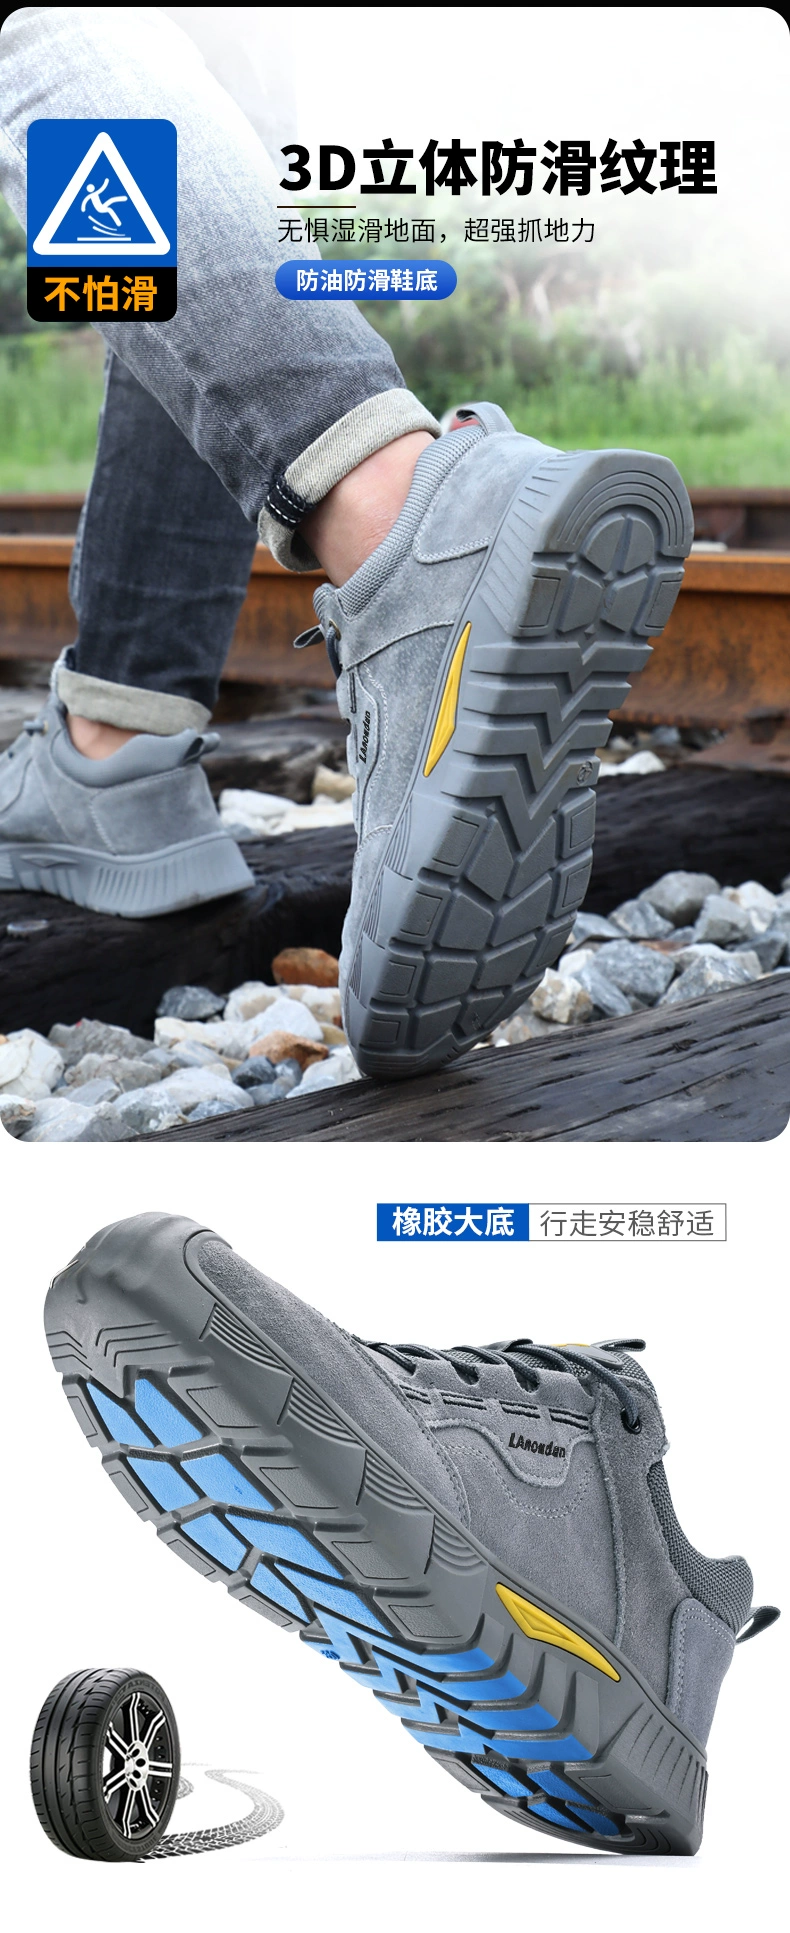 Blue Gull Shield labor protection shoes for men, steel toe, anti-smash, anti-puncture, ultra-light, construction site insulation work, old steel plate safety